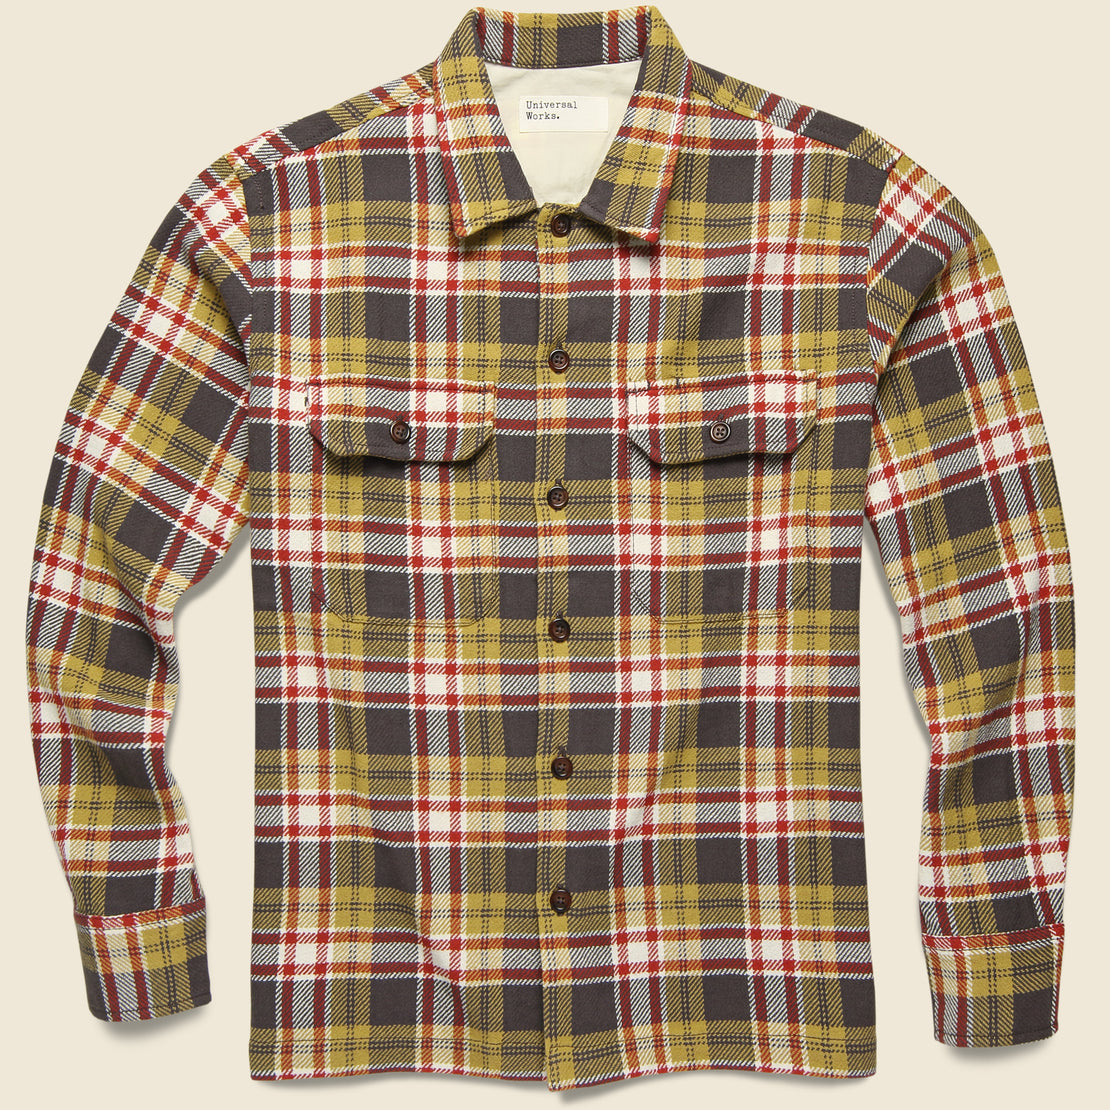 Universal Works Utility Shirt - Sand/Red Check